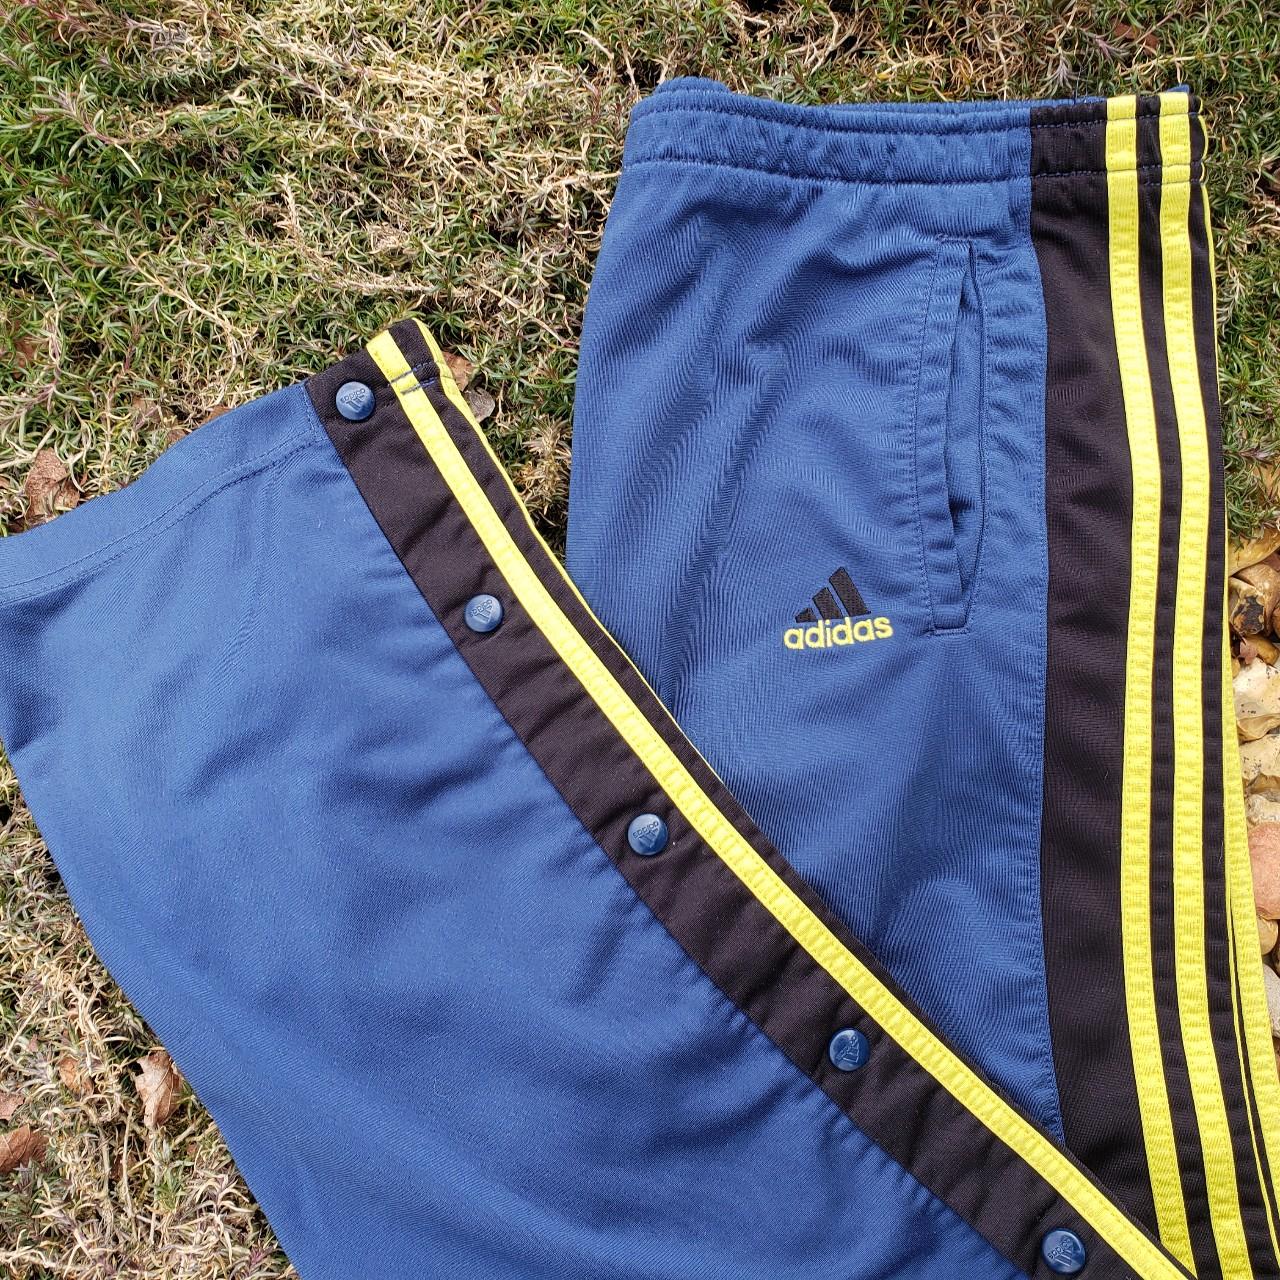 adidas adibreak side popper track pants in black - ShopStyle Activewear  Trousers